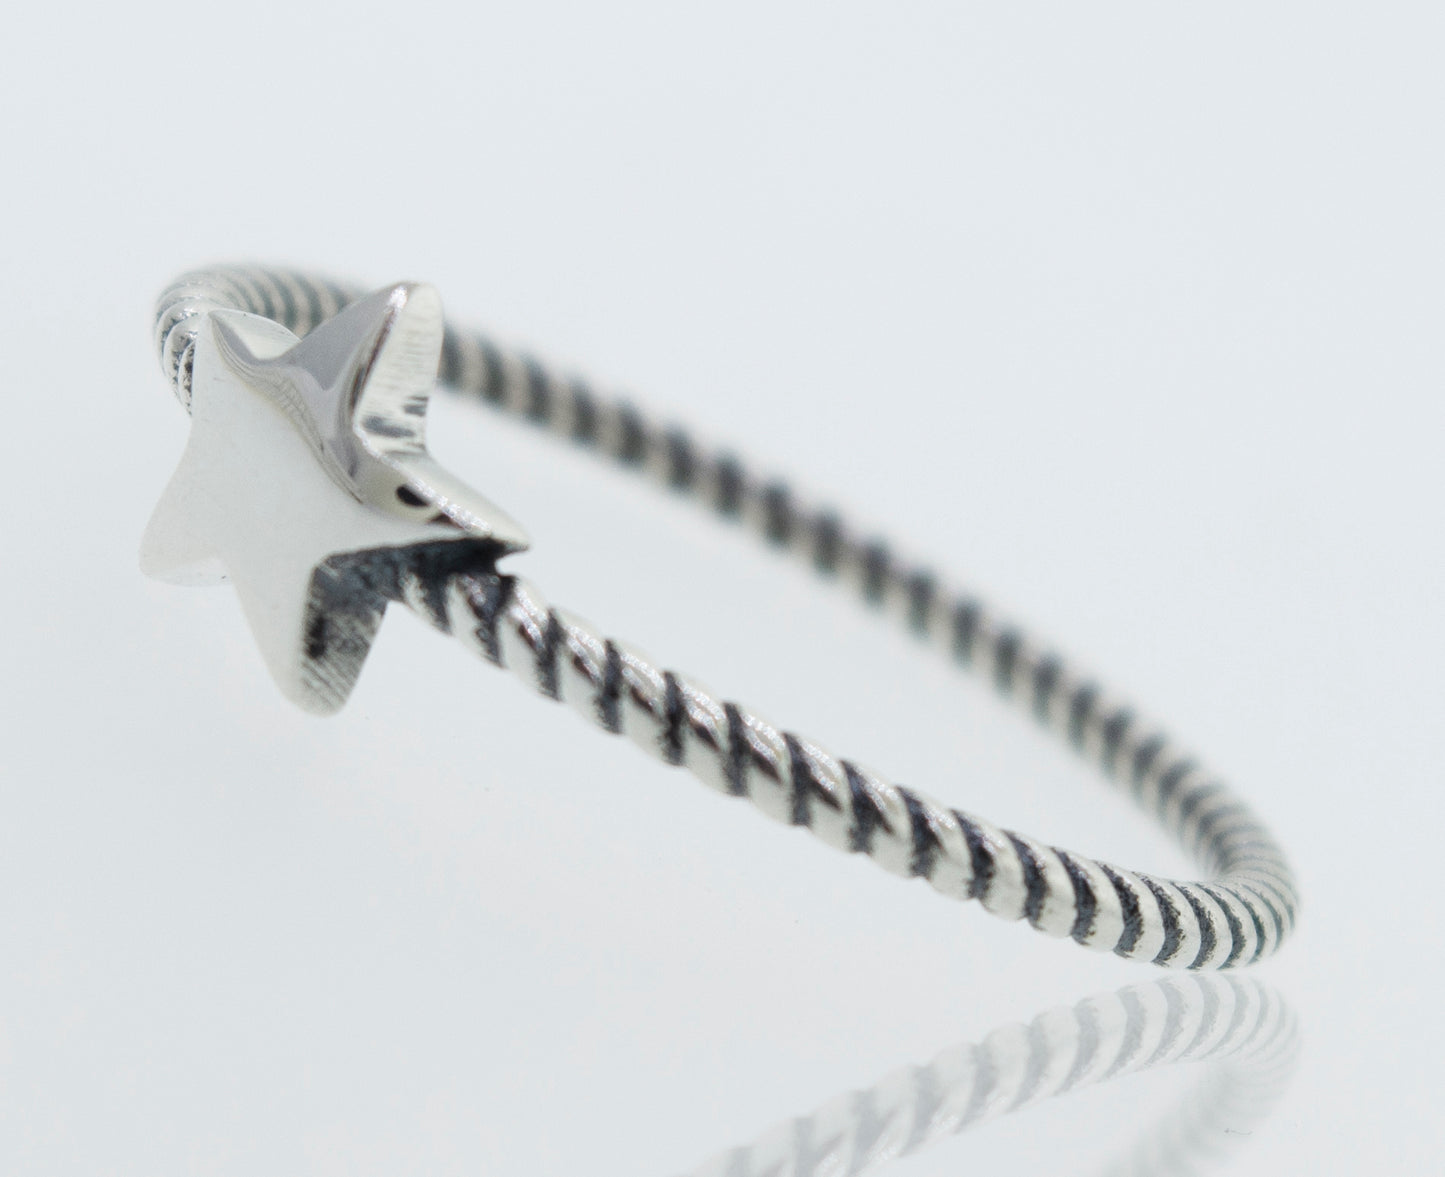 An oxidized Super Silver star ring with a rope design band on a white surface.